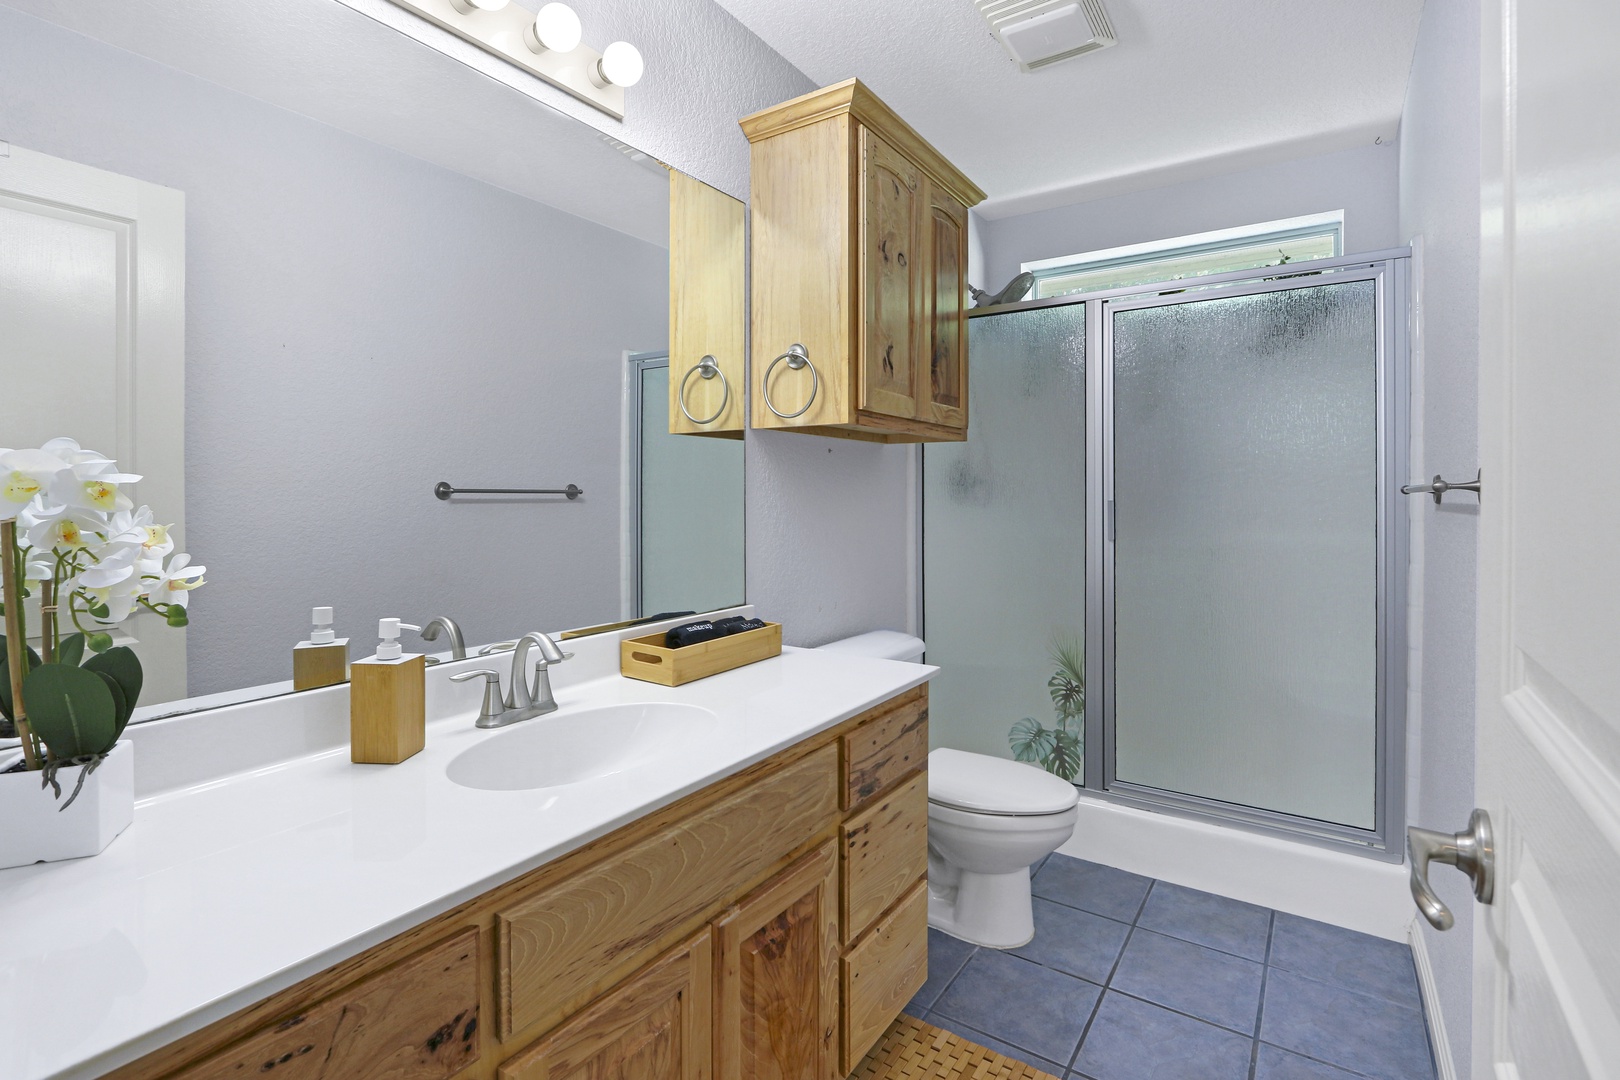 2 of 2 spacious full bathrooms, with an oversized vanity & glass shower